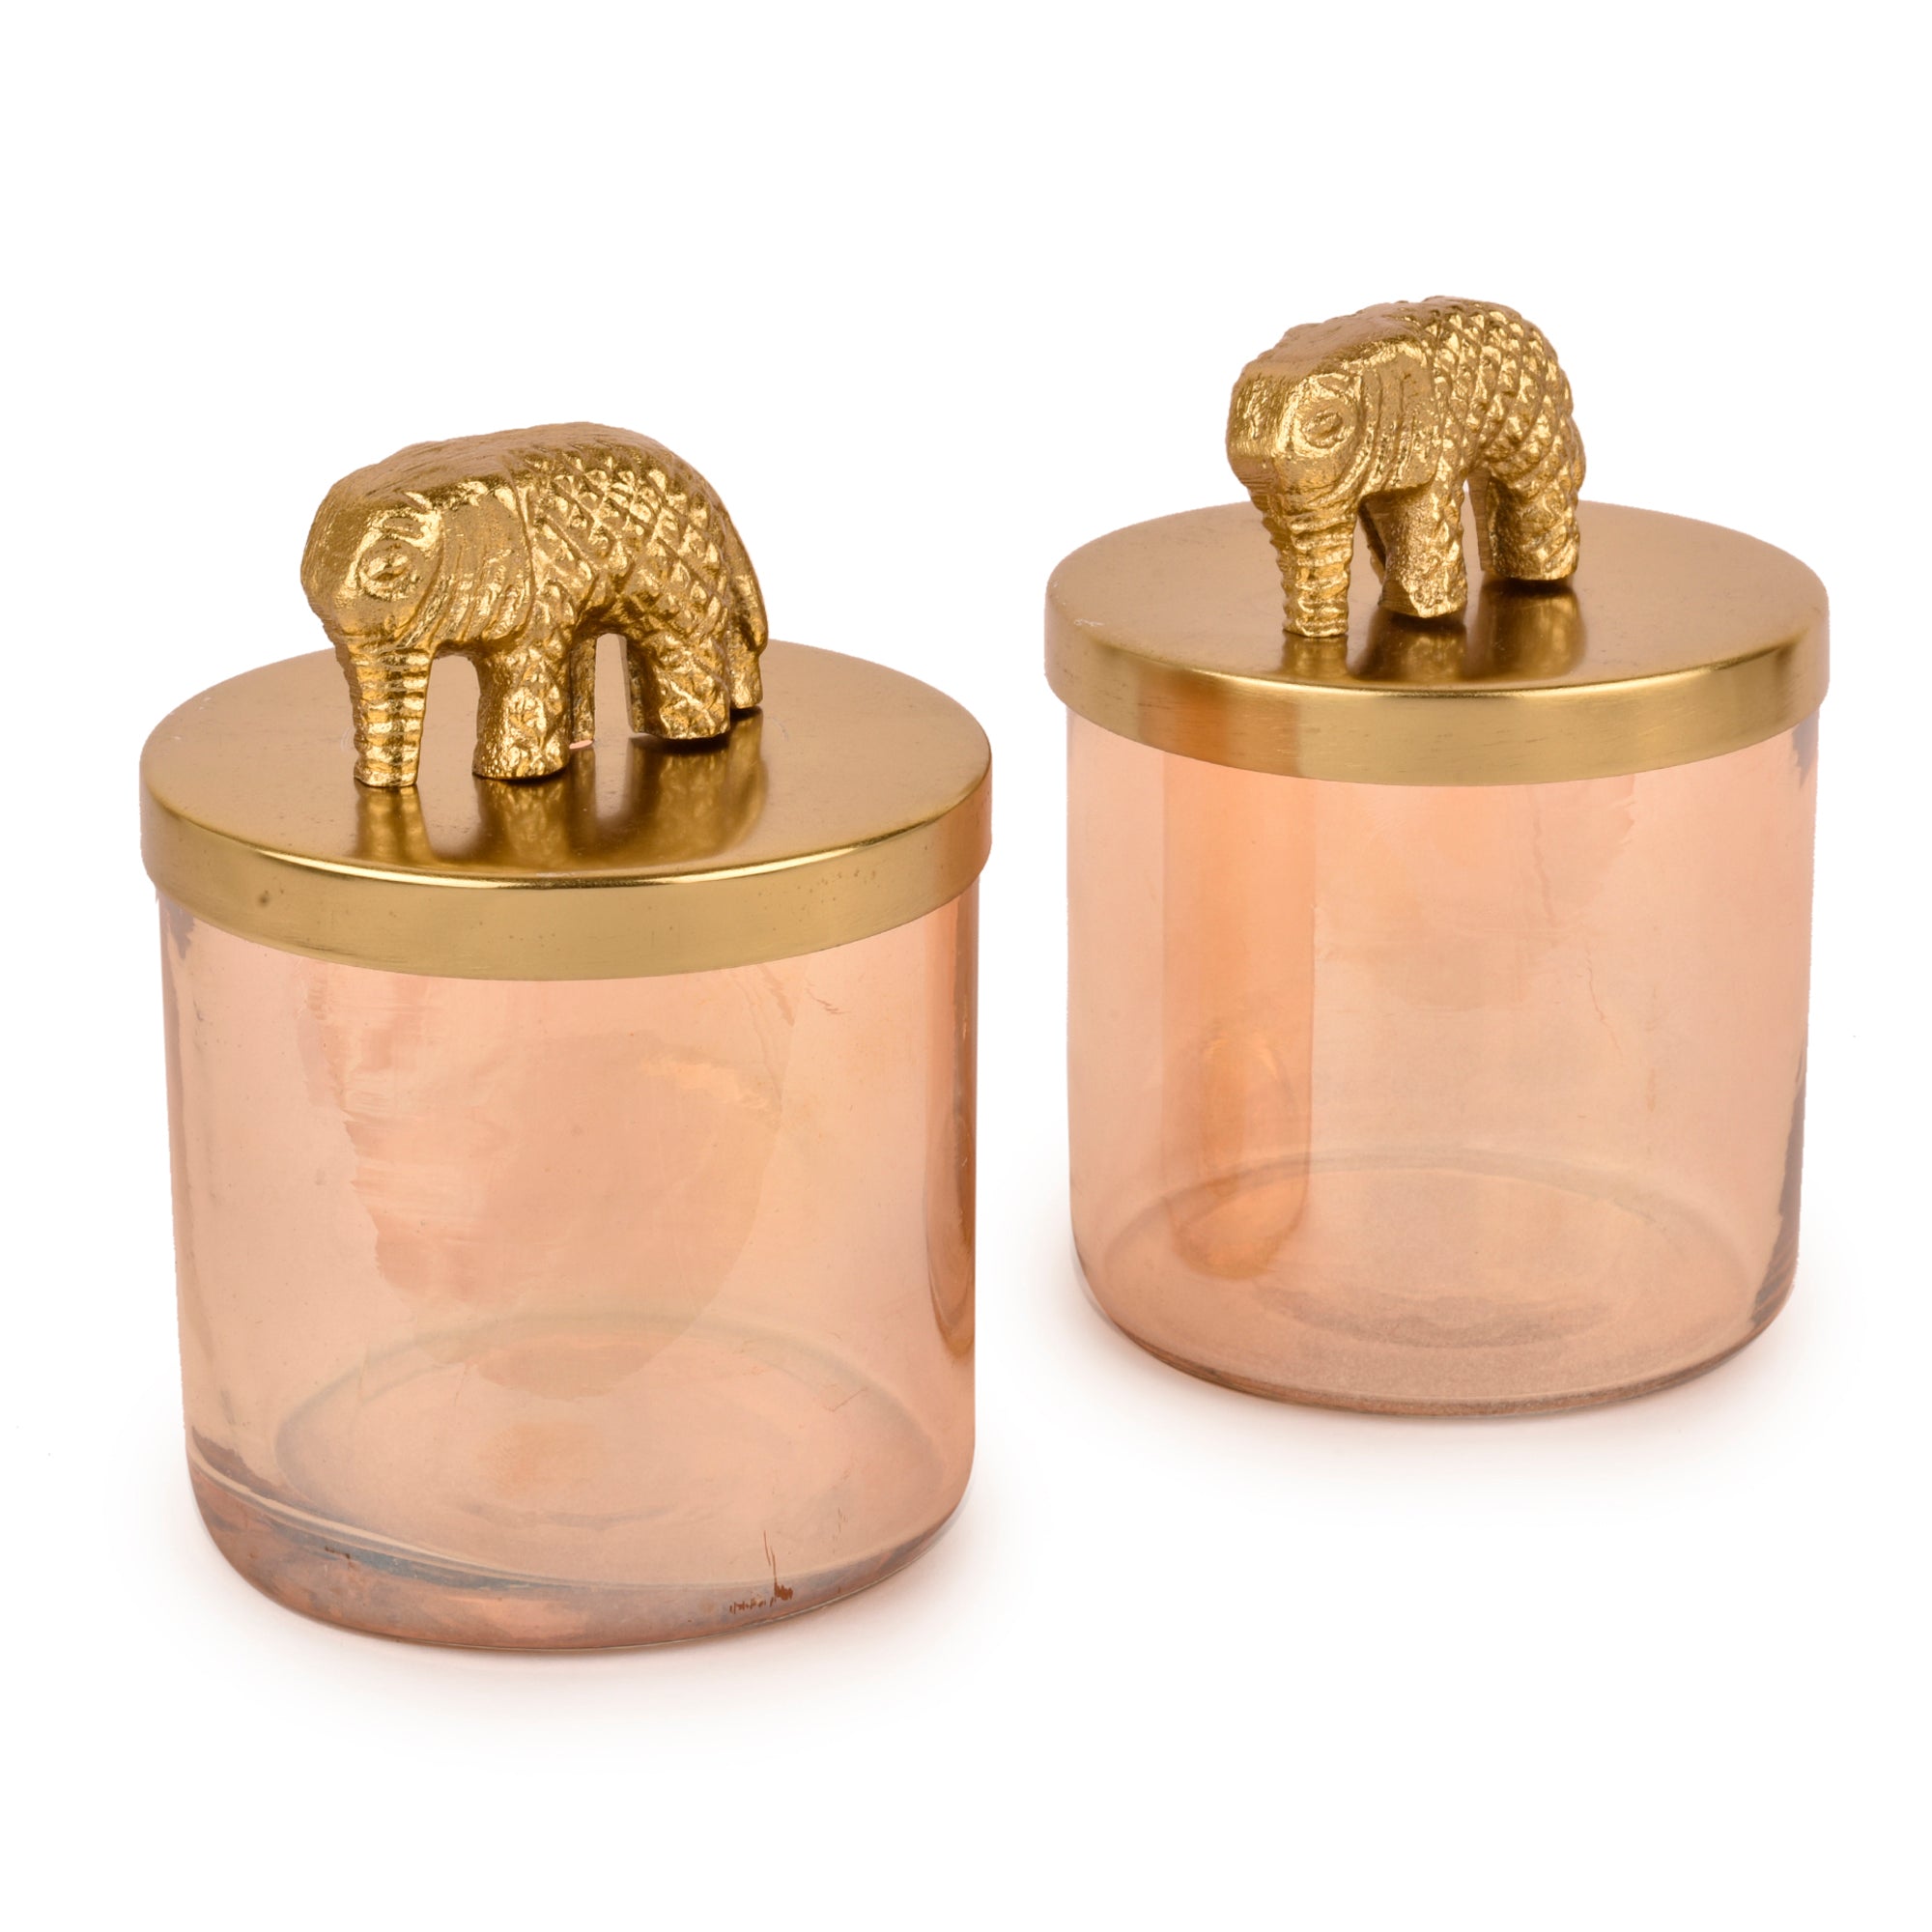 Elephant Lustre Glass Jars with Seenk Tray